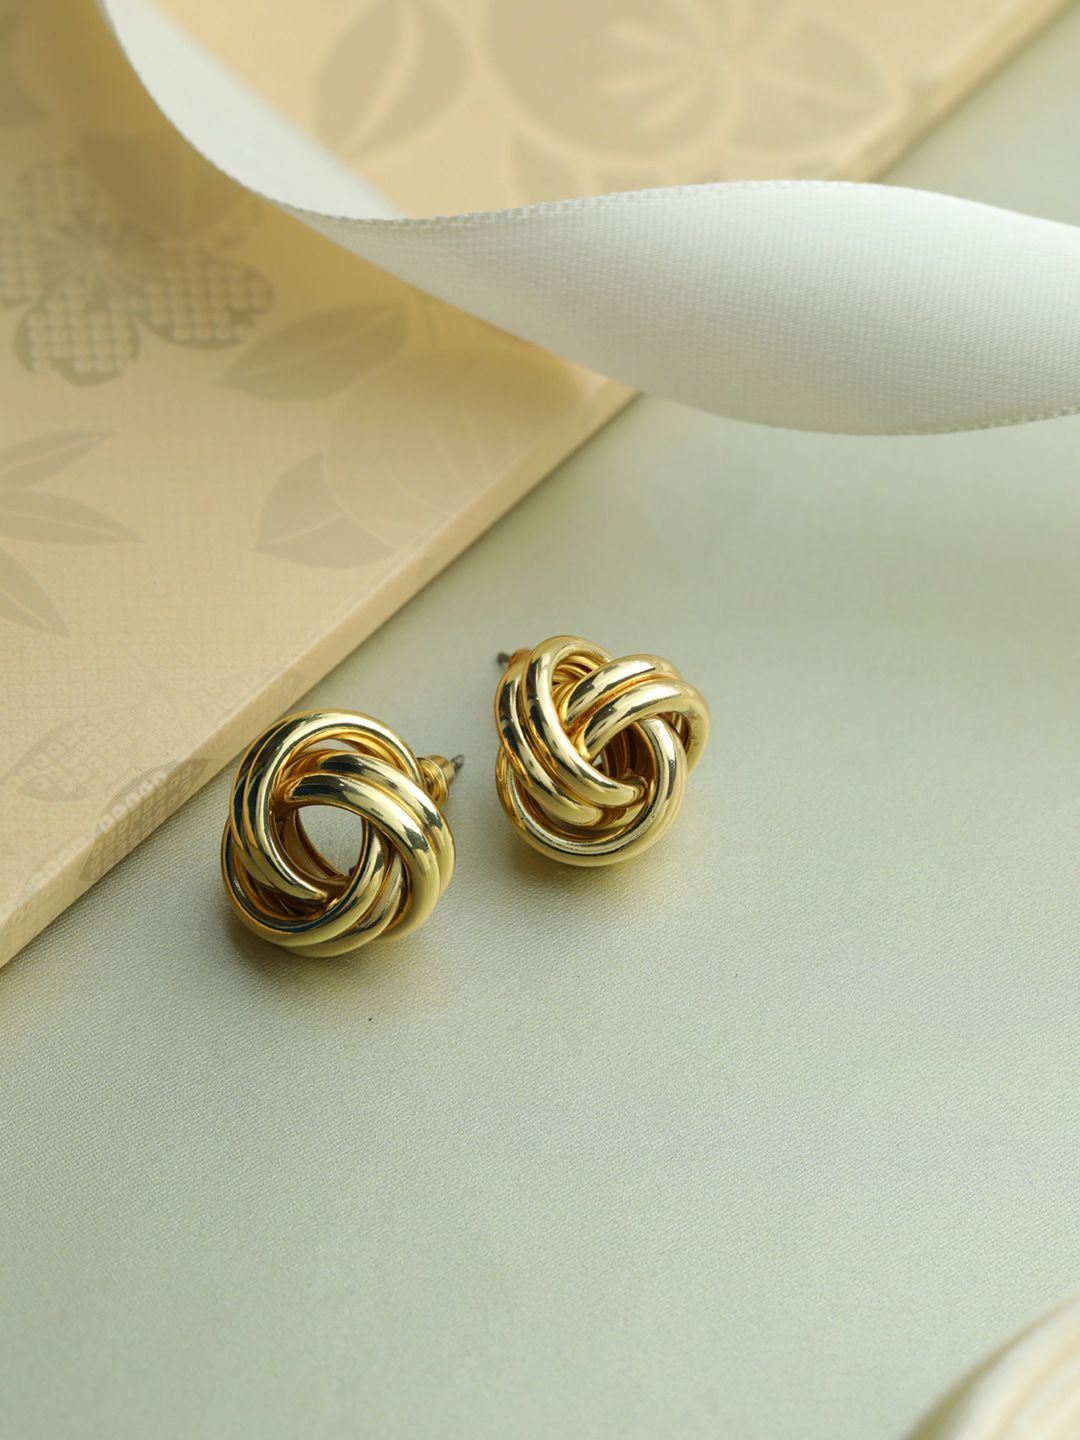 Priyaasi Gold-Plated Contemporary Studs Earrings Price in India